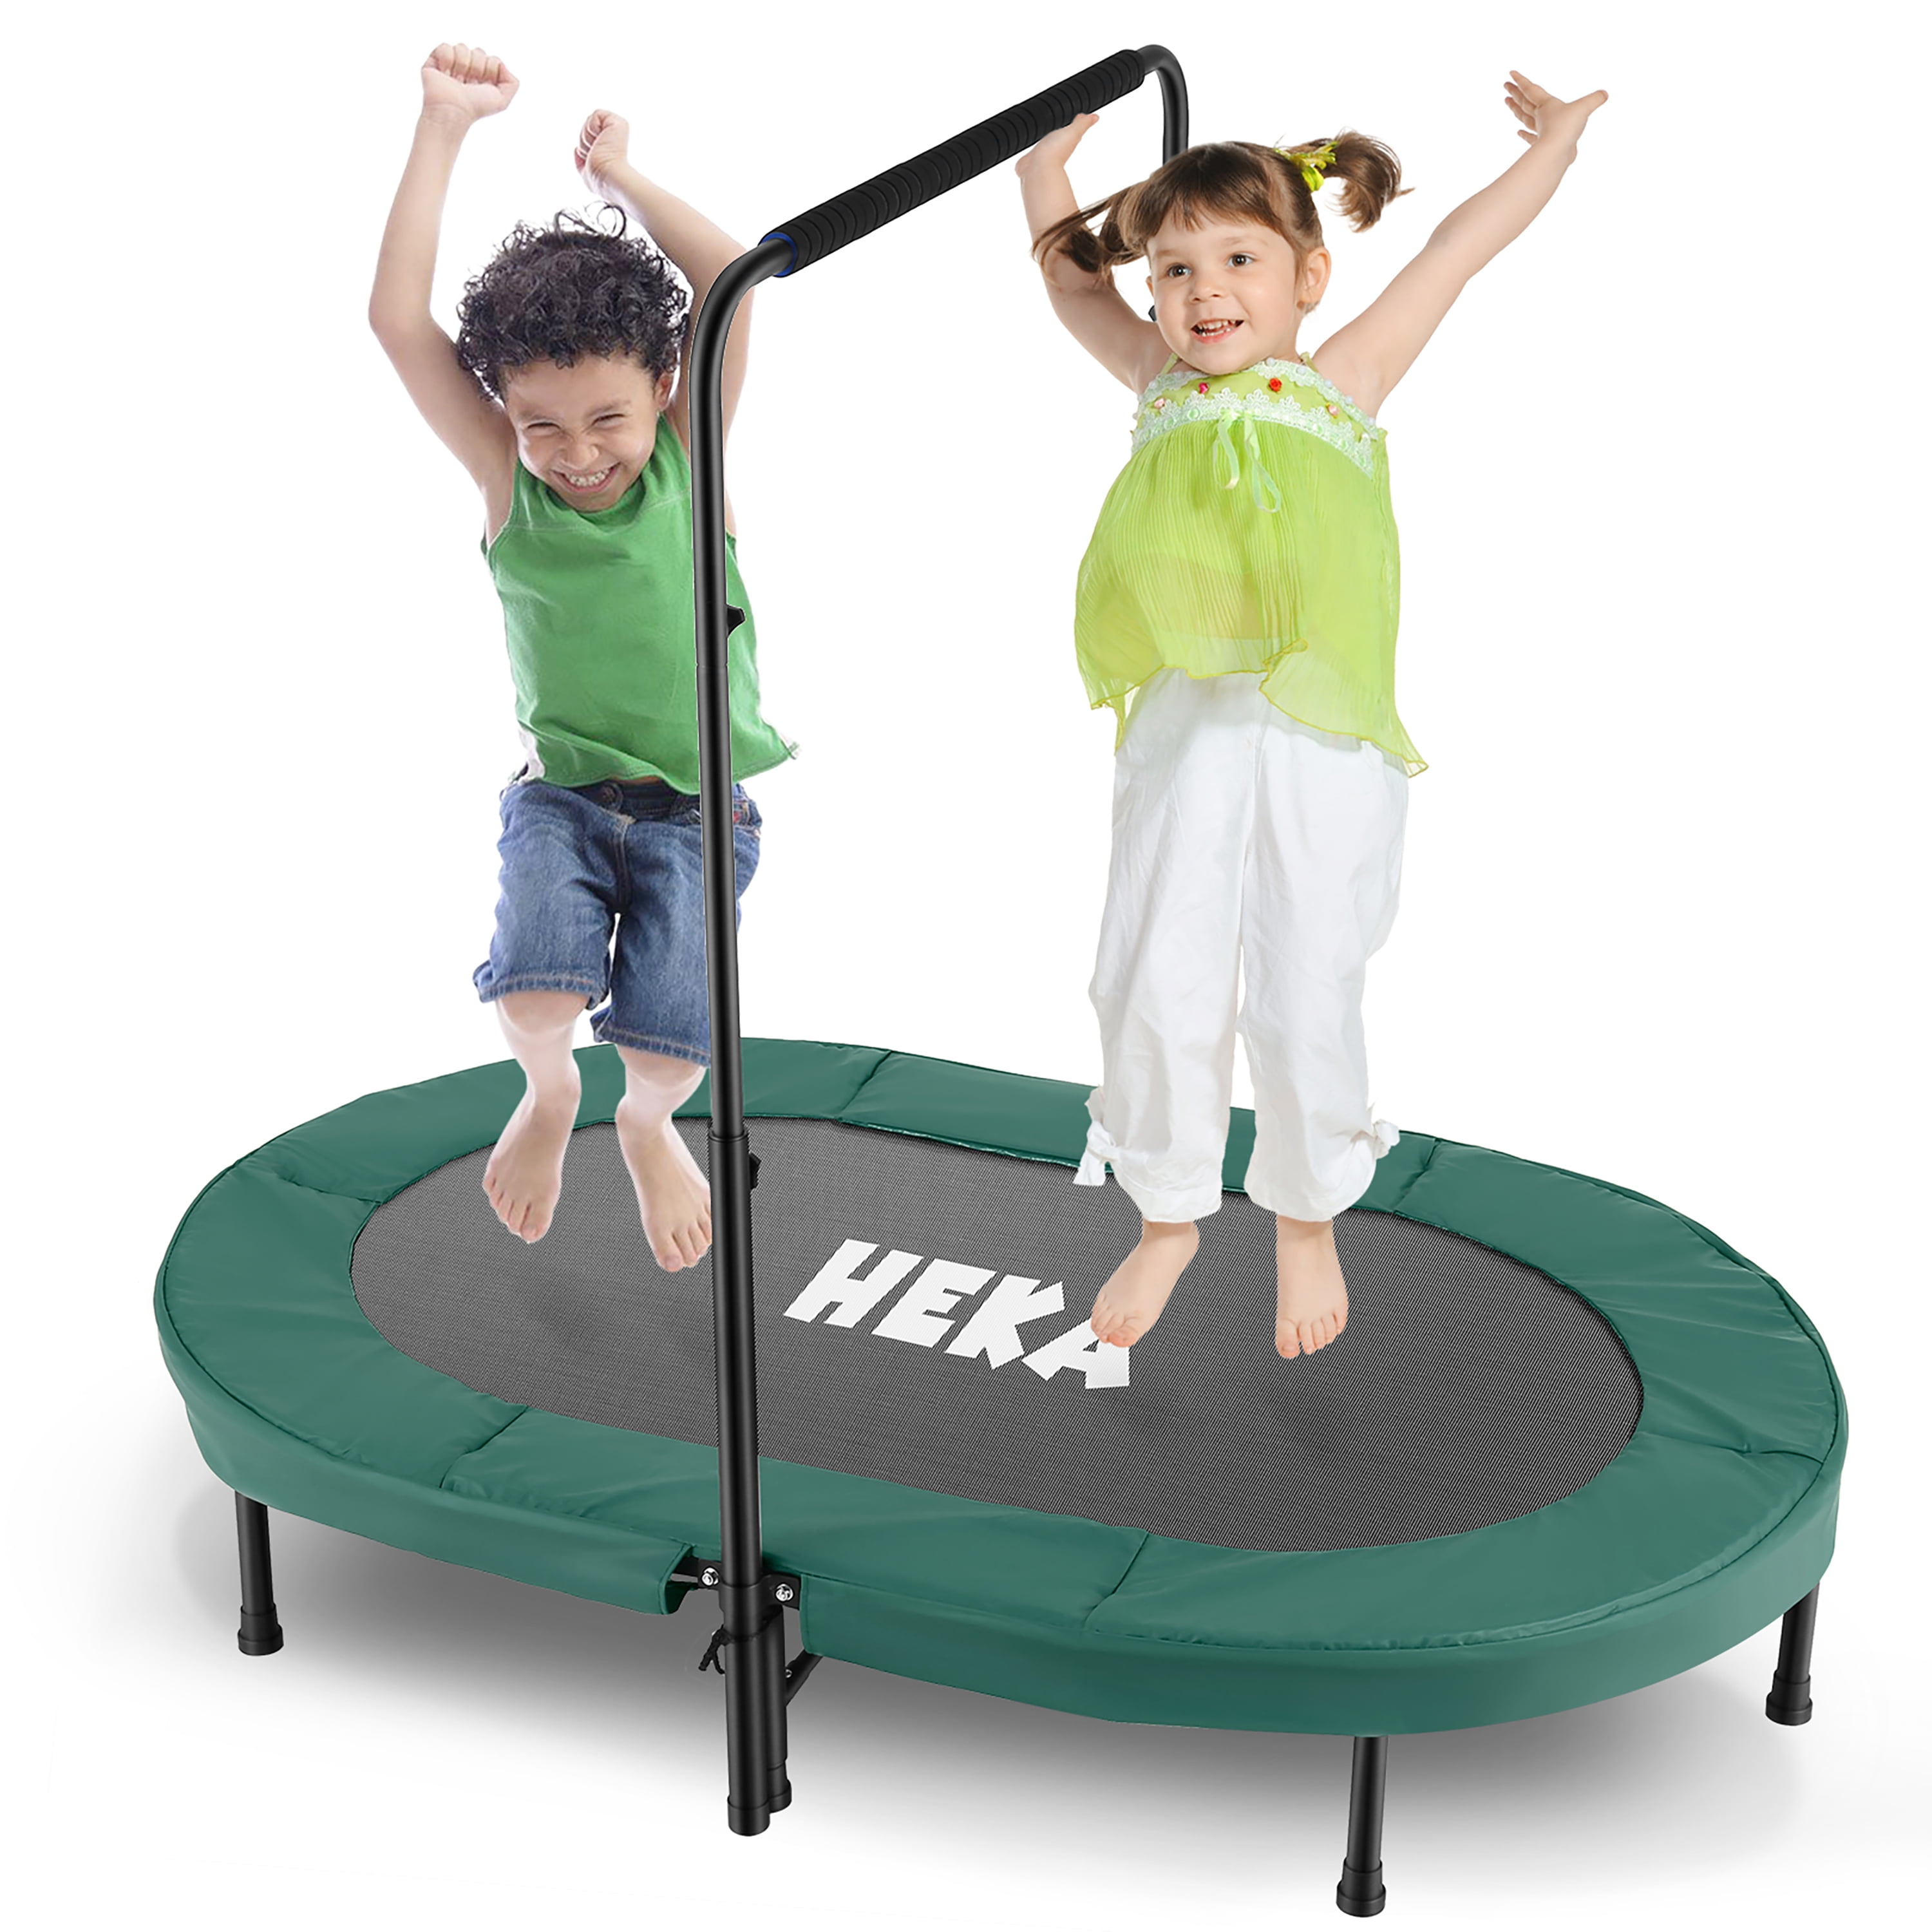 HEKA 56-Inch Foldable Mini Exercise Trampoline Indoor Fitness Rebounder Trampoline with Safety Pad Max. Load 220LBS for Kids Adults Indoor/Garden Workout